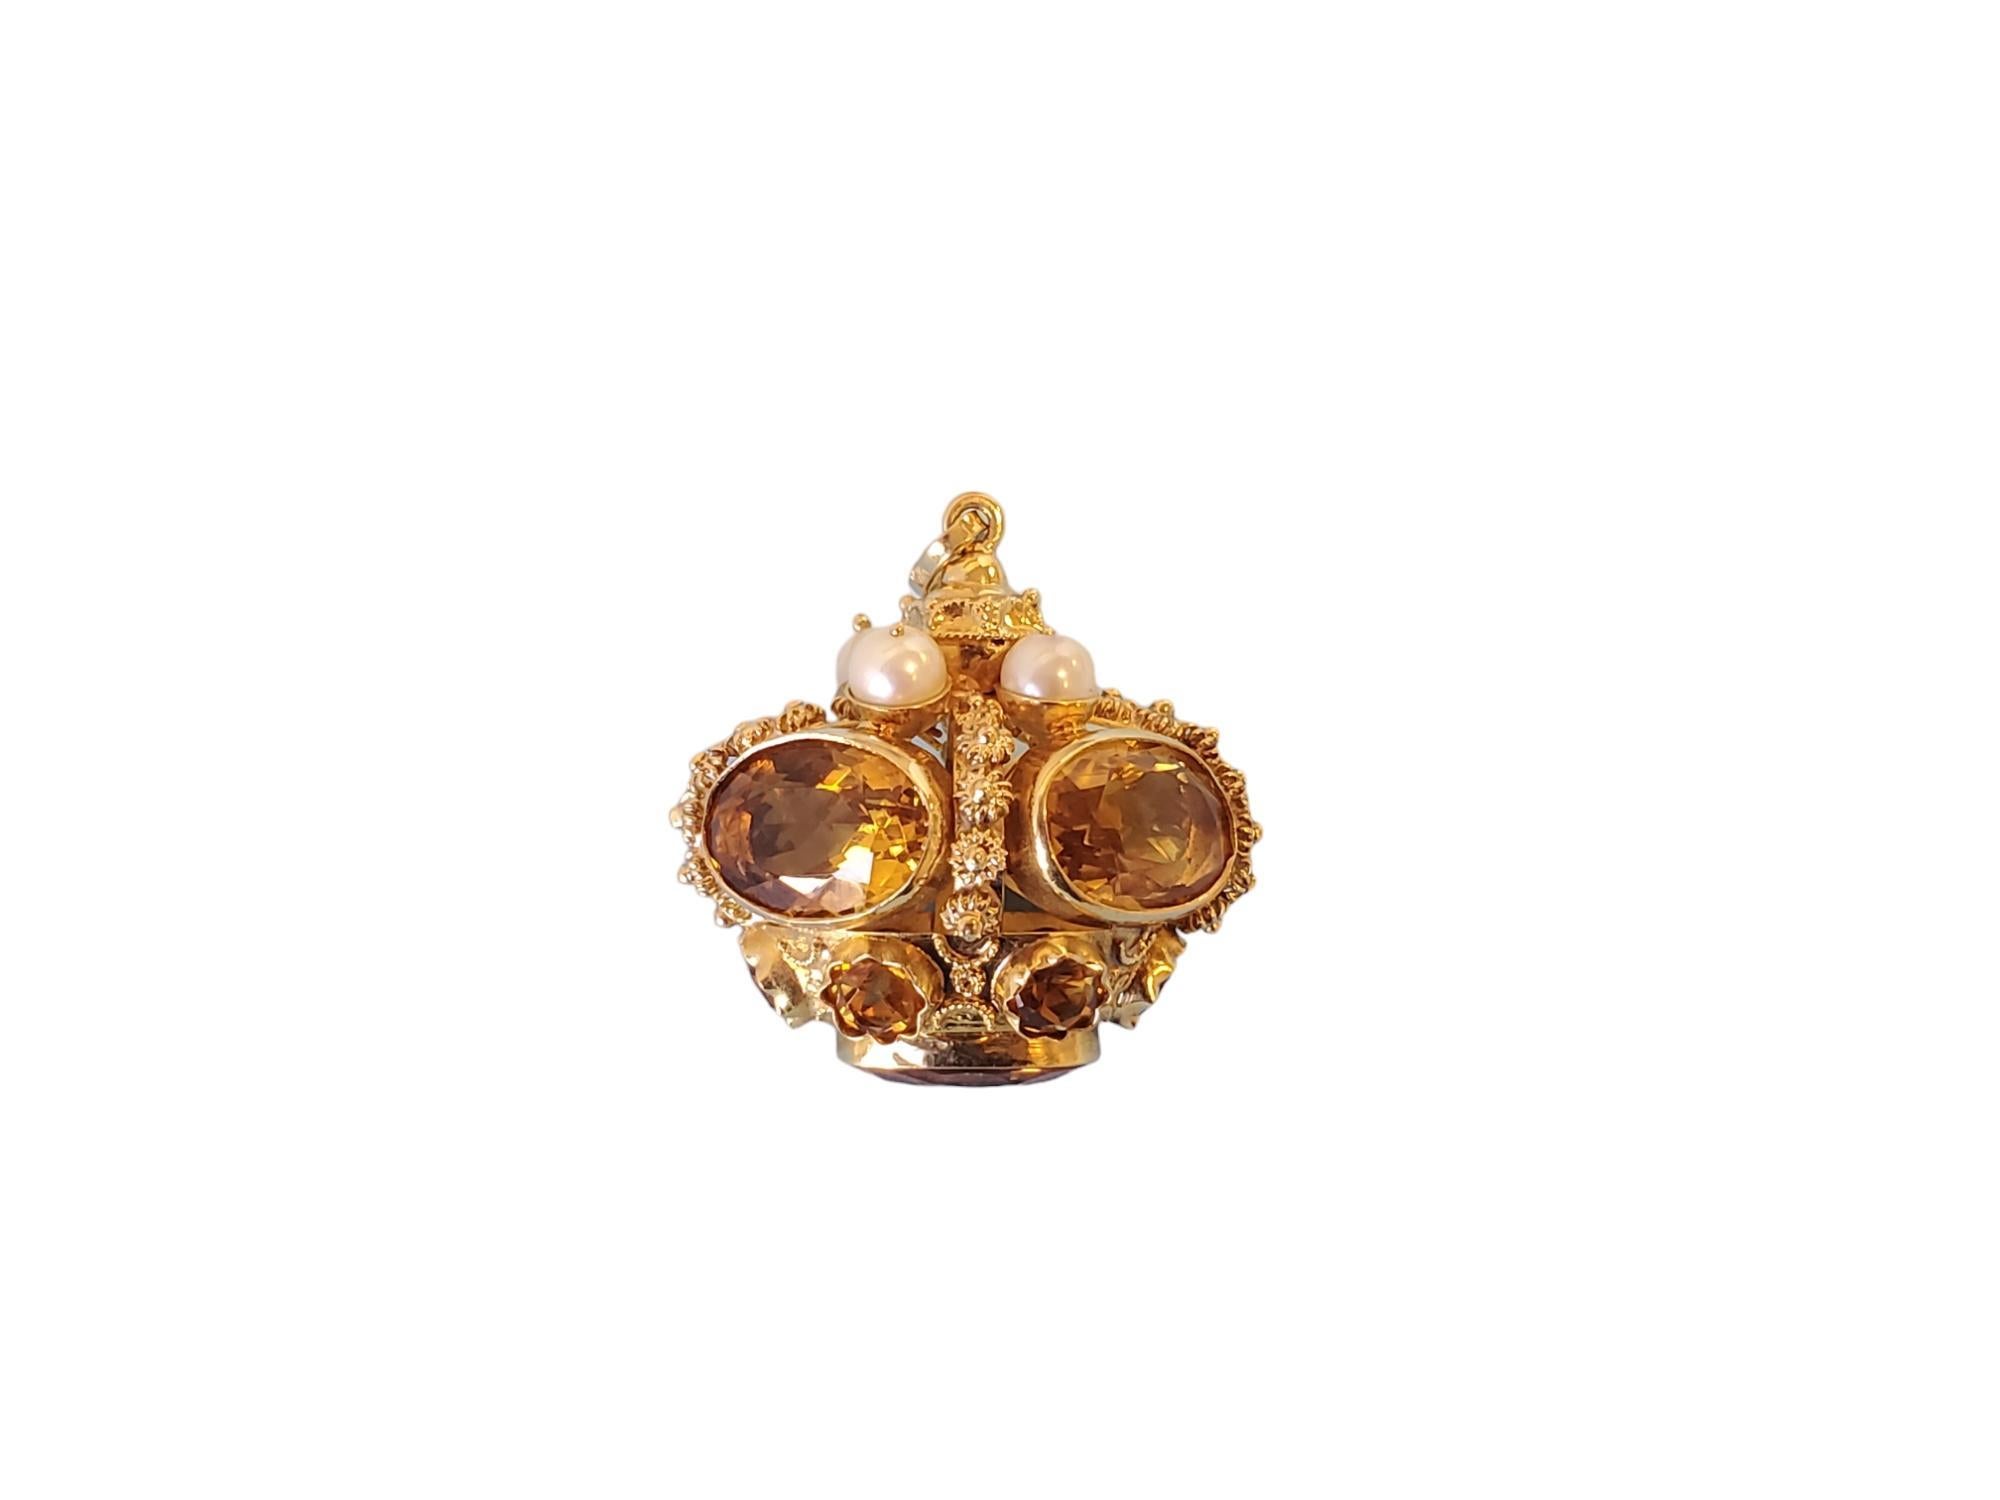 Listed is an 18k yellow gold vintage crown pendant/charm. This crown features beautiful oval citrine gemstones and pearl accents. Its in fantastic condition and weighs a hefty 23.1 grams. Its approximately 1.25